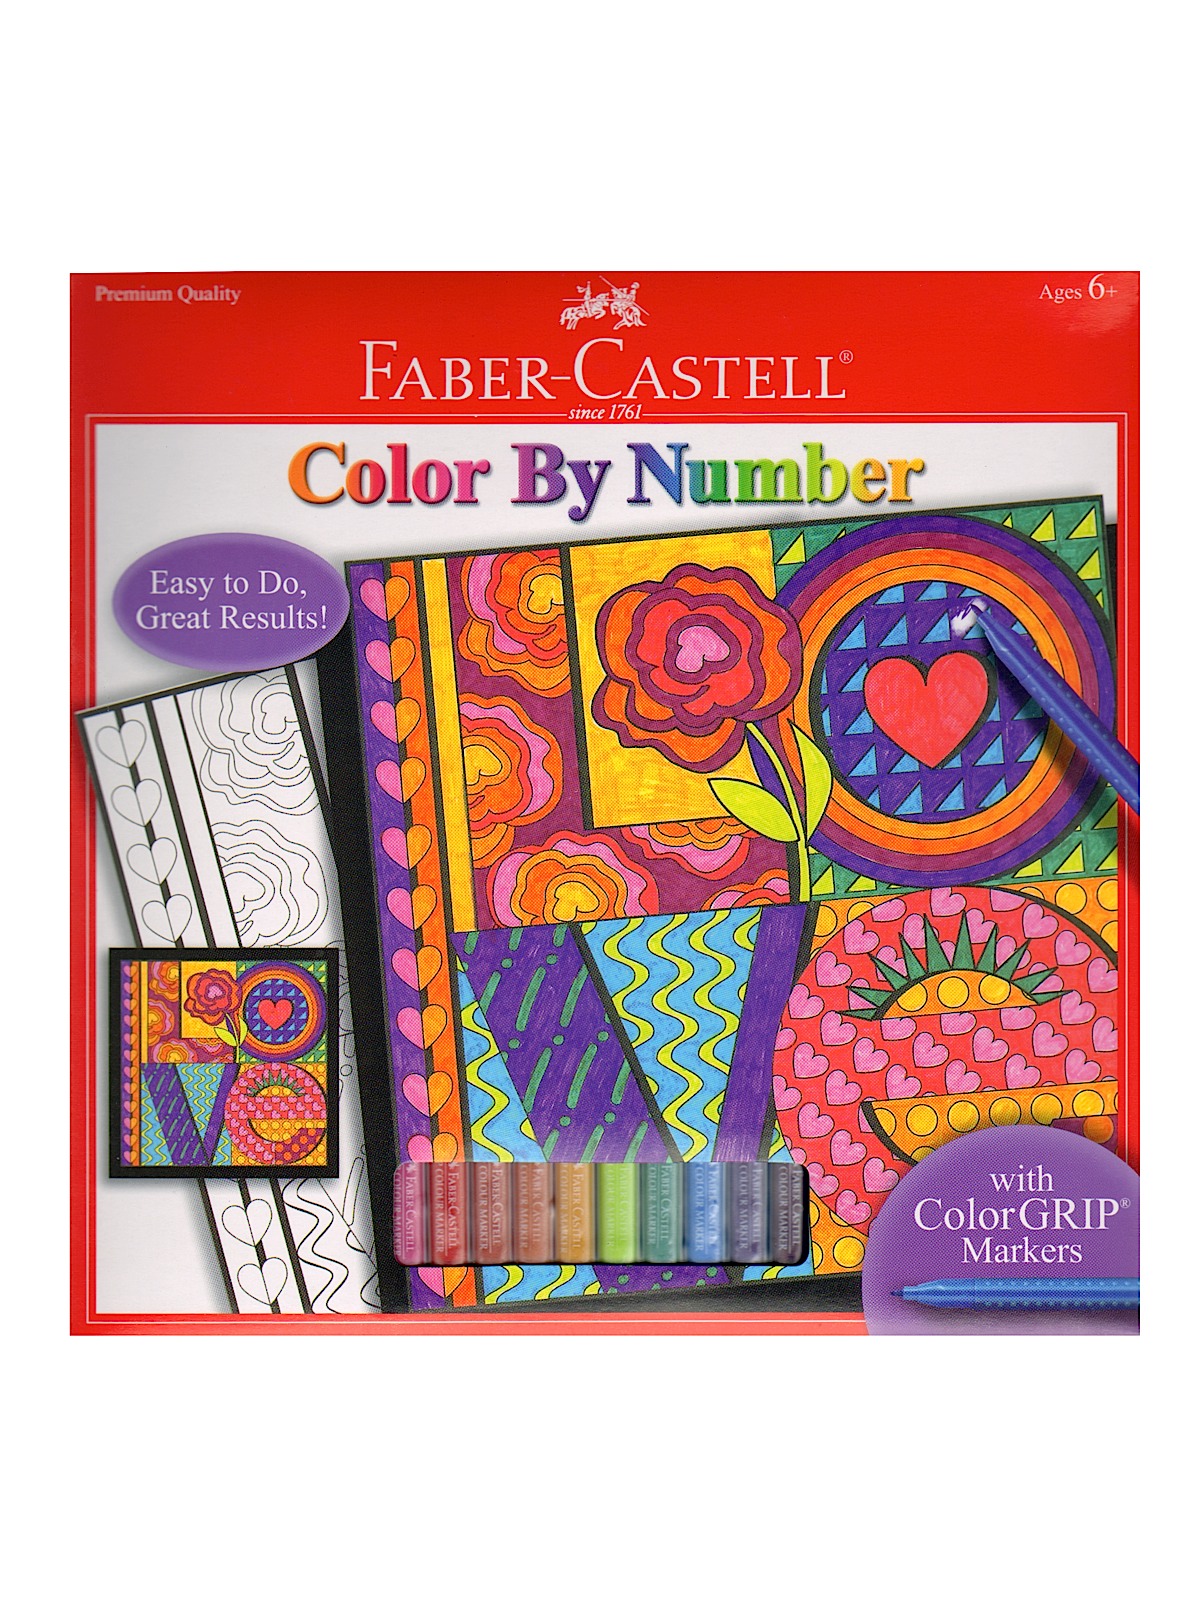 Color By Number With Markers Kits Love